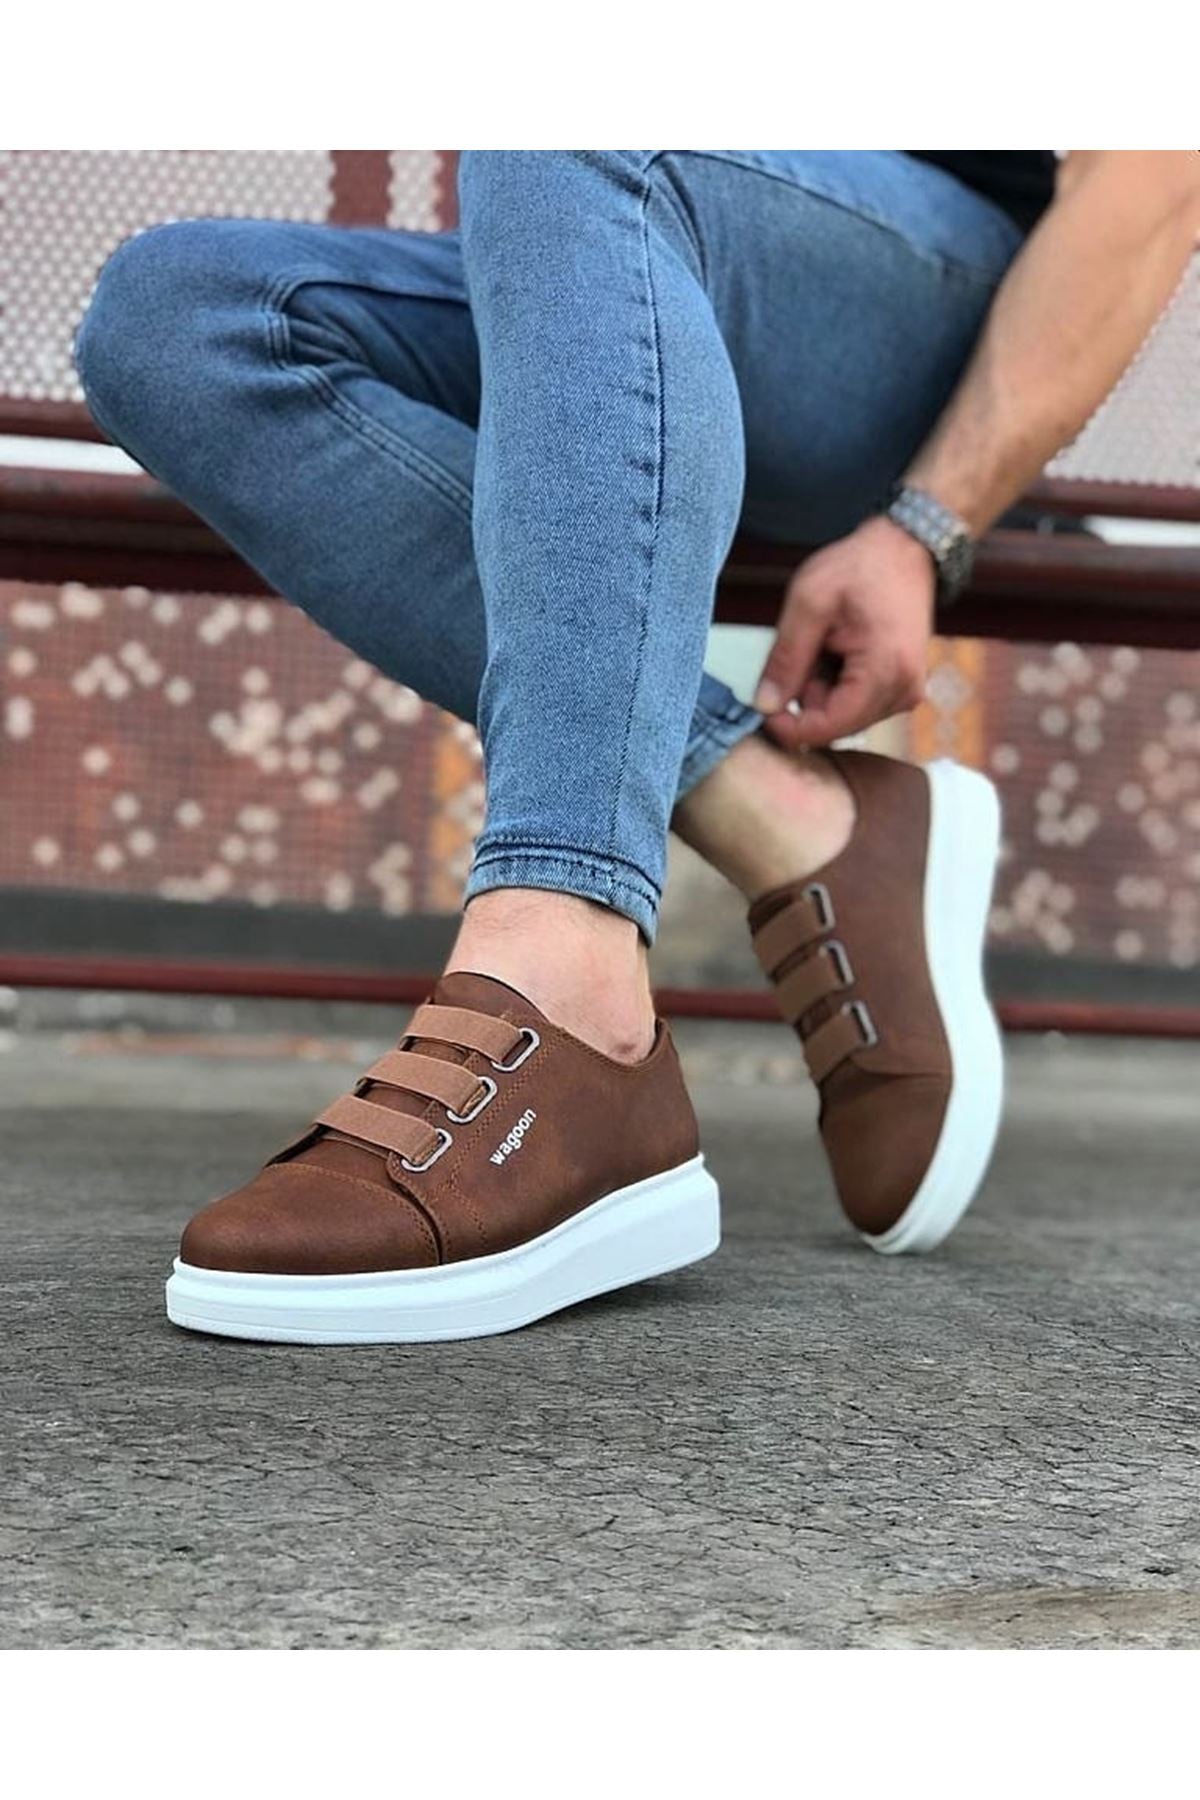 WG026 3 Band Tan Thick Sole Casual Men's Shoes - STREETMODE™